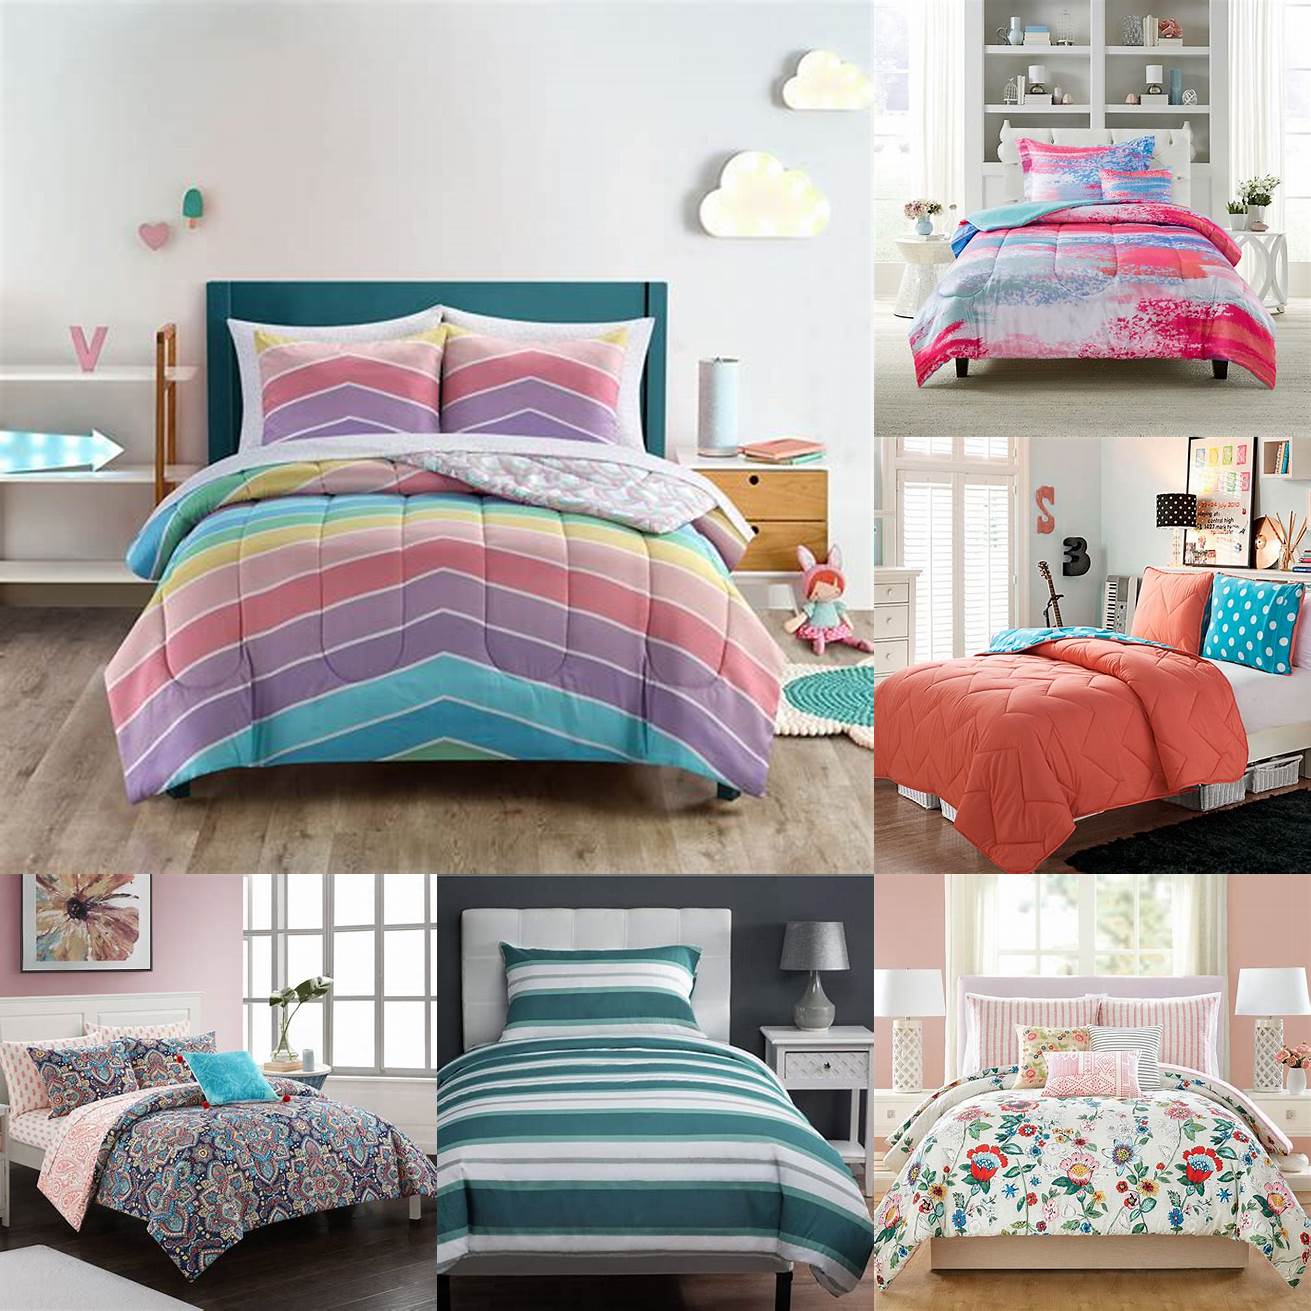 Dont be afraid to have fun with your XL Twin Bed bedding This colorful option adds personality to a small space